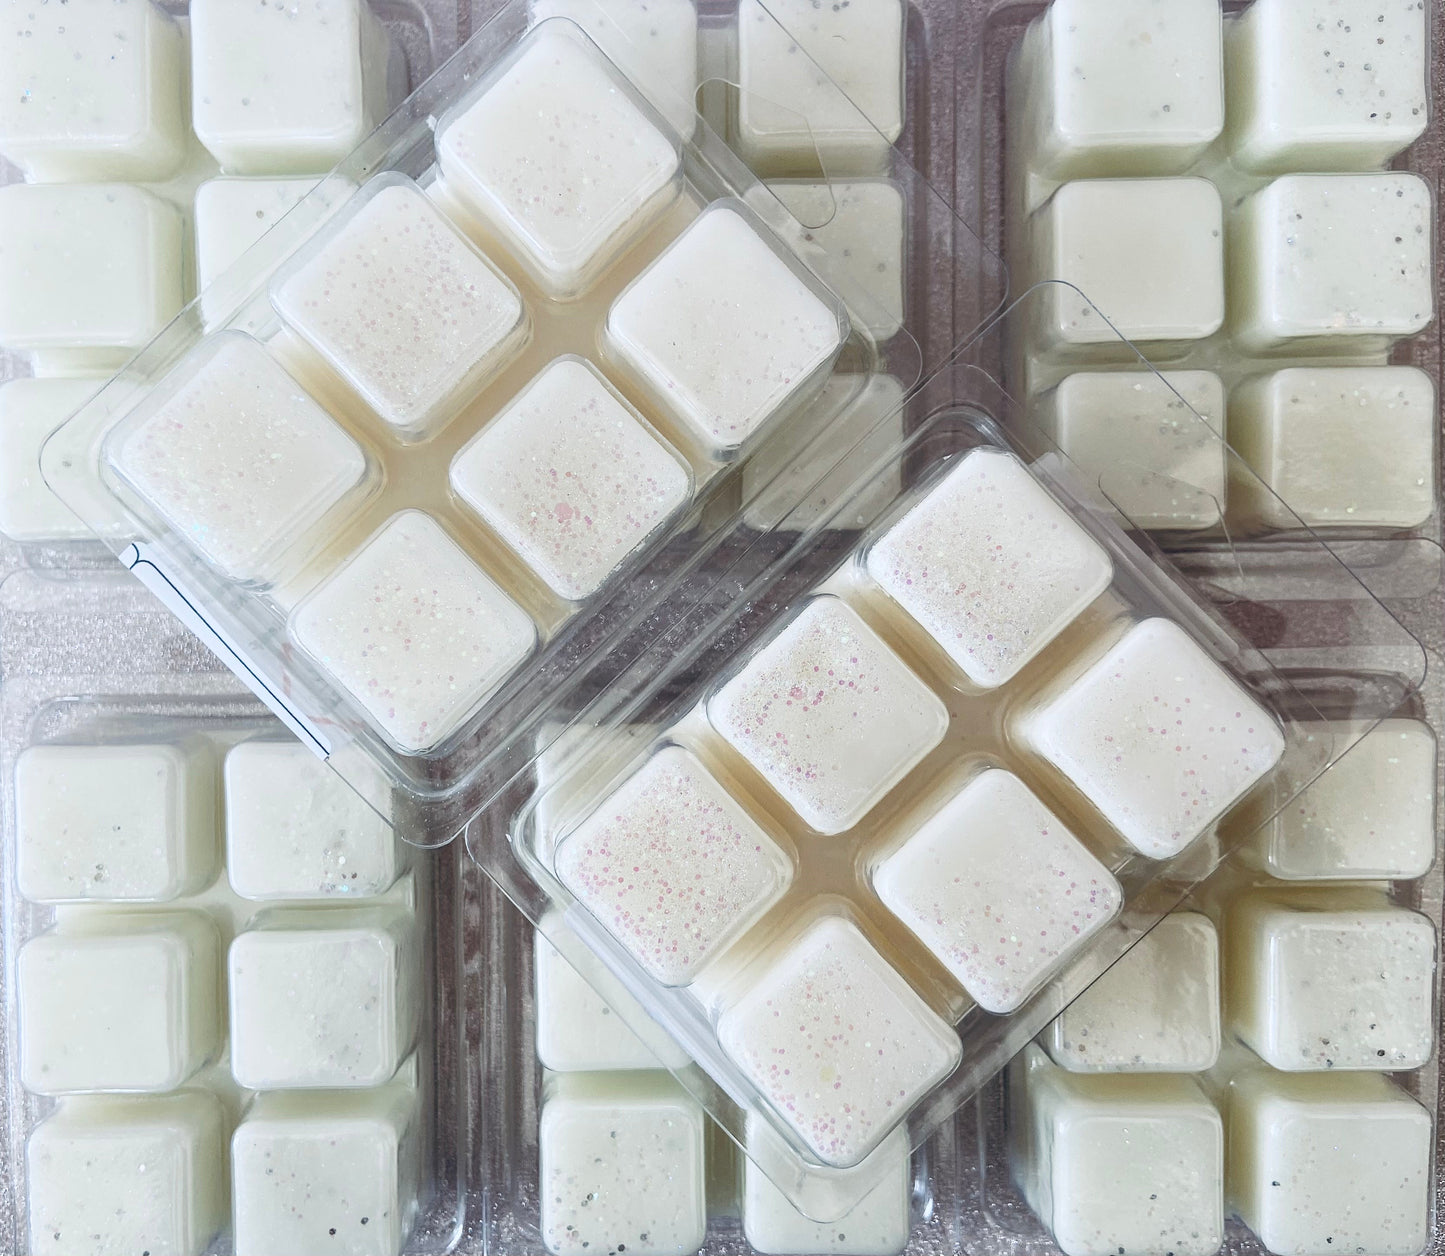 Multiple packages of high-quality, square-shaped Clean Cotton wax melts arranged neatly, some with speckles by The Soap Gals.